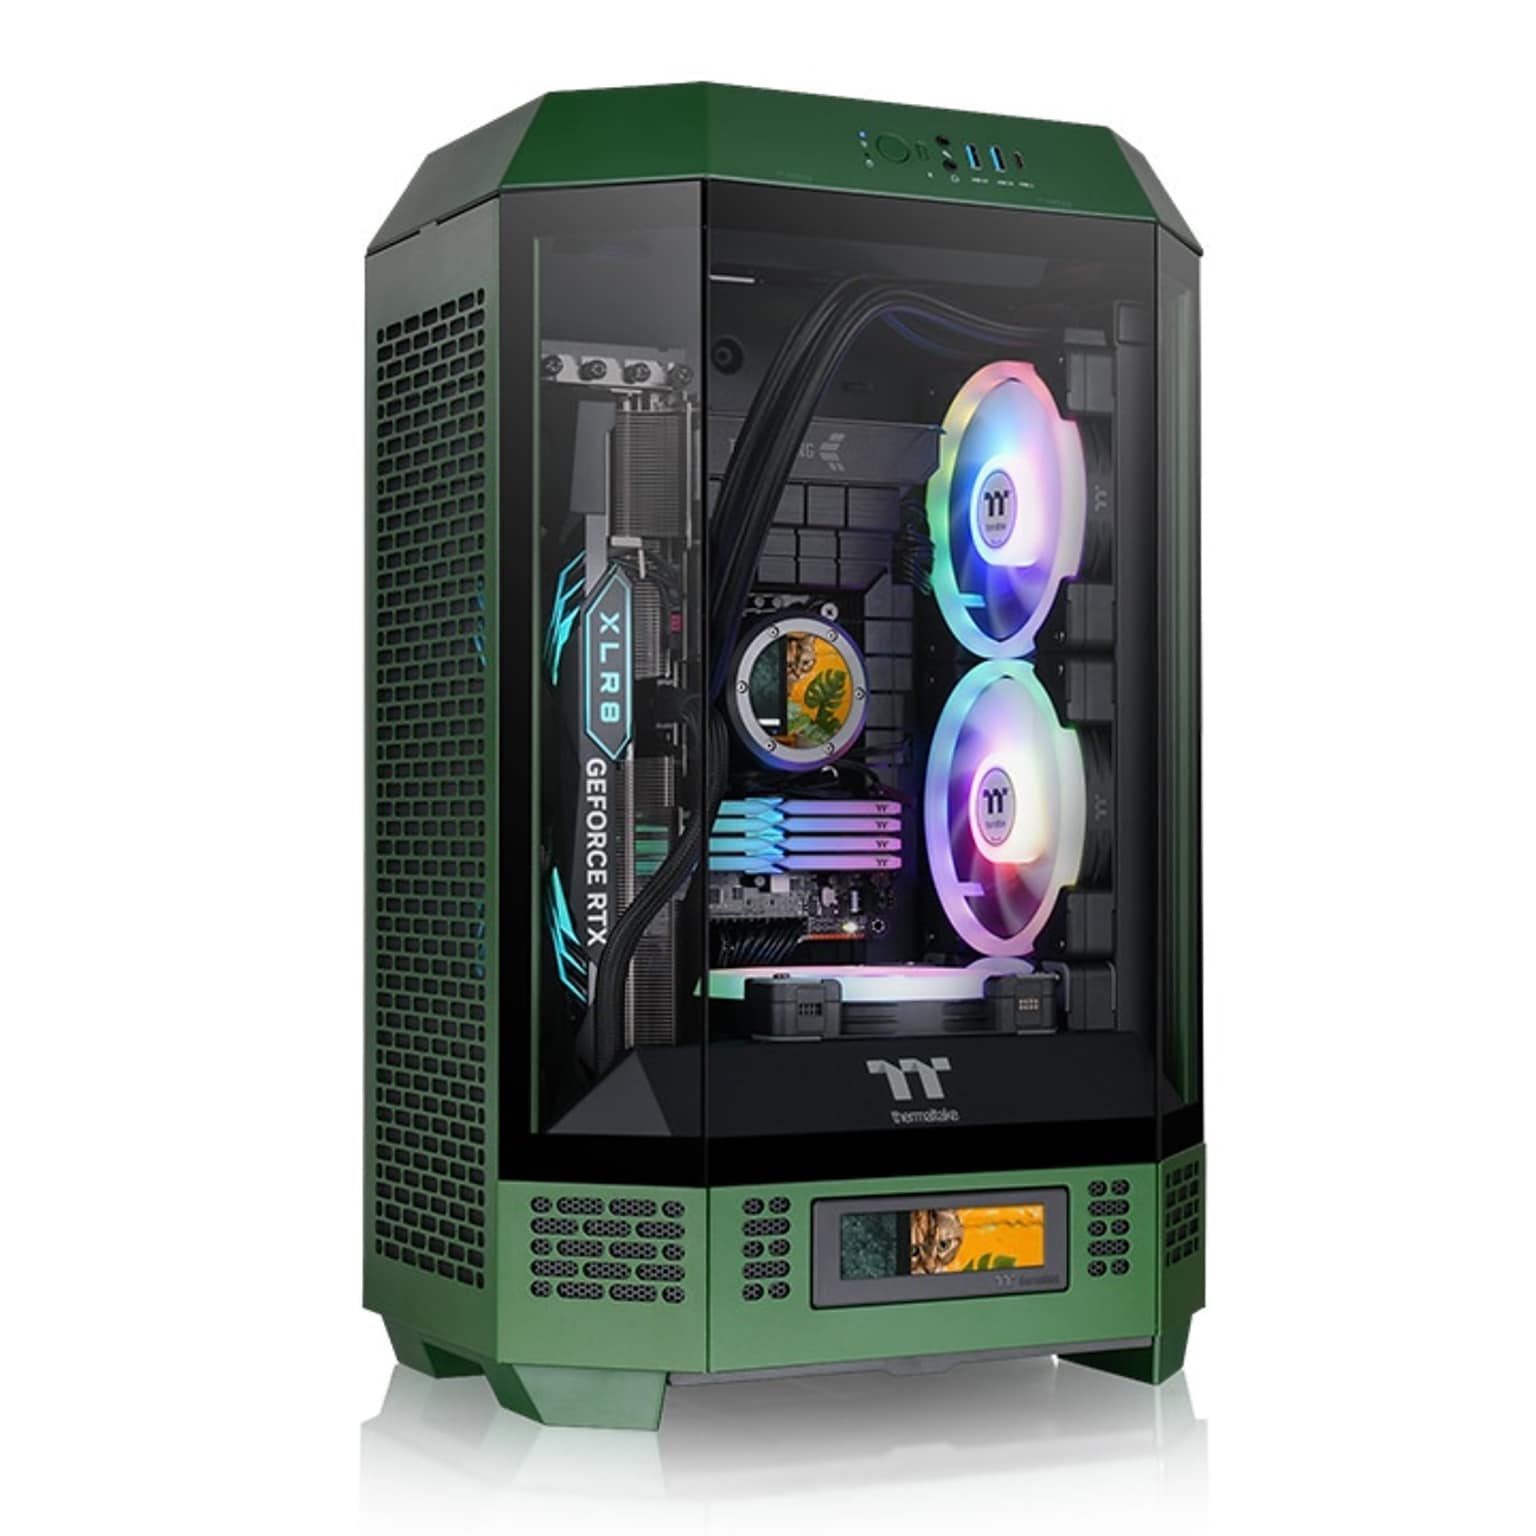 Thermaltake The Tower 300 m-ATX Micro Tower Chassis, Racing Green (CA-1Y4-00SCWN-00)